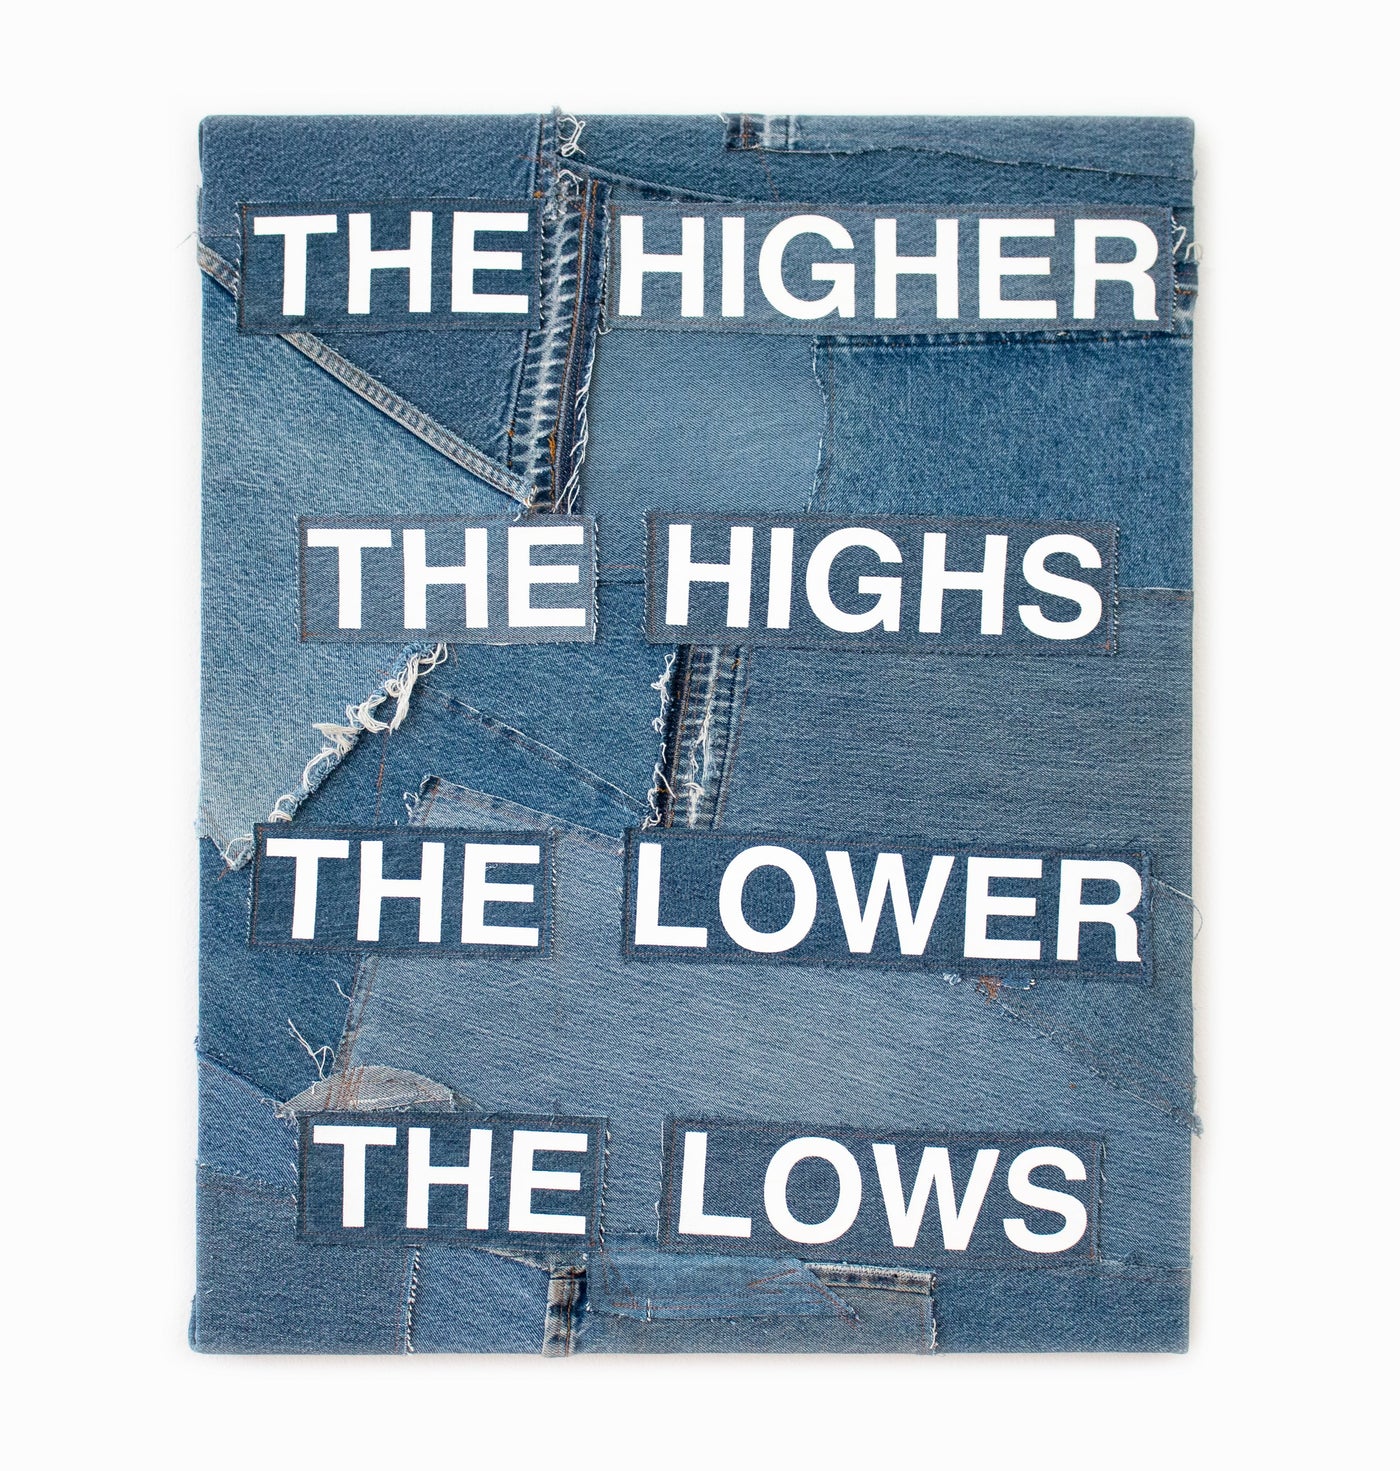 The Higher The Highs, The Lower The Lows: Blue